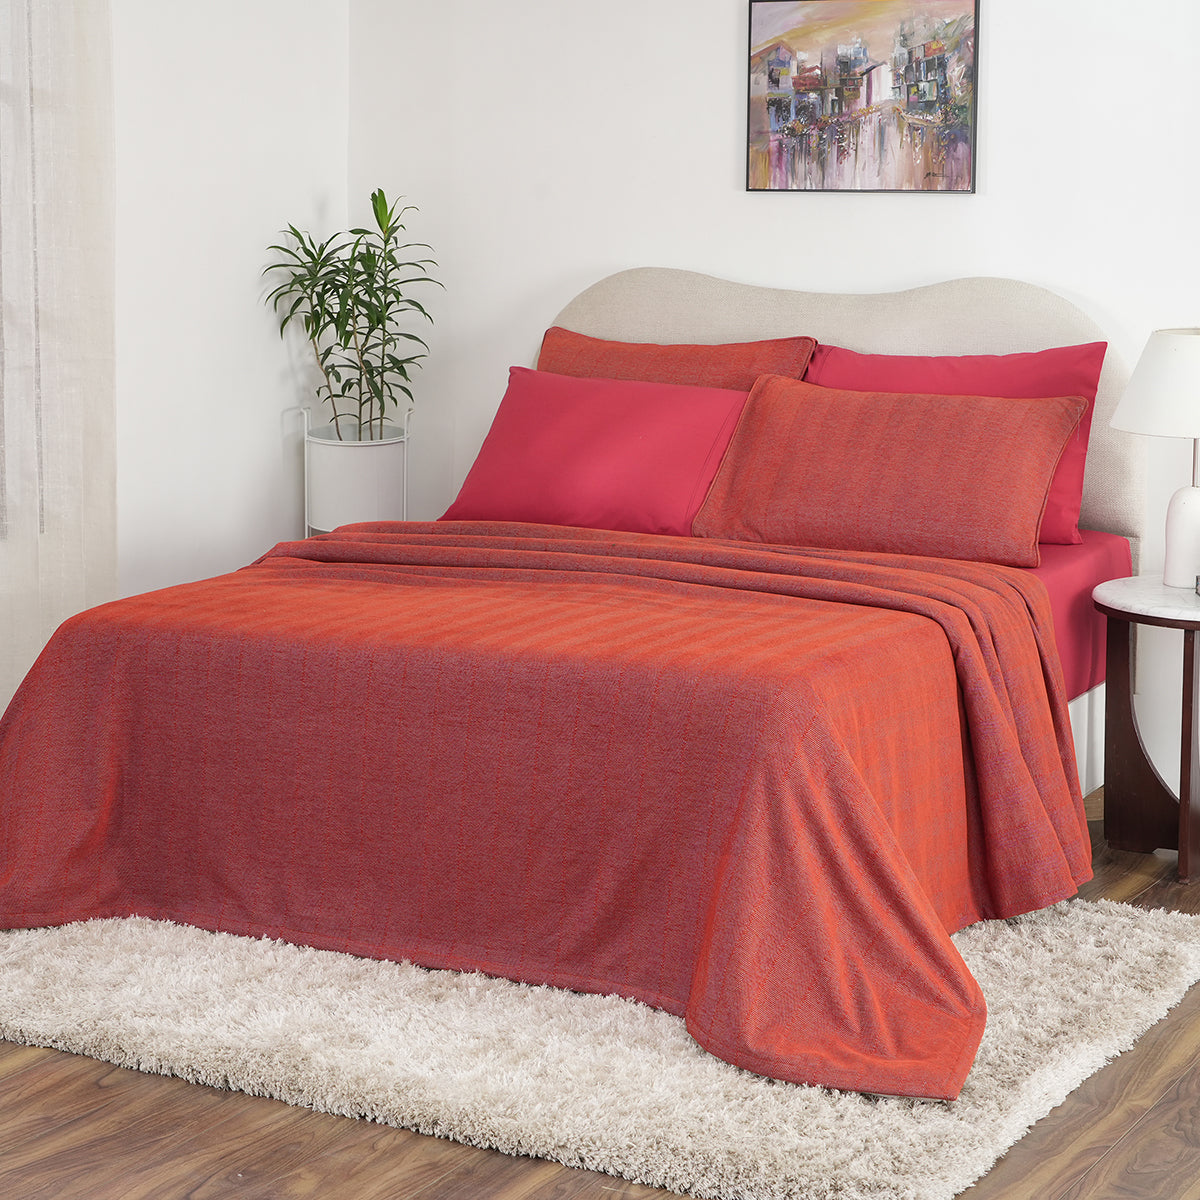 Caroline Woven Herringbone Pattern with Soft Drape Style Red Bed Cover/Blanket